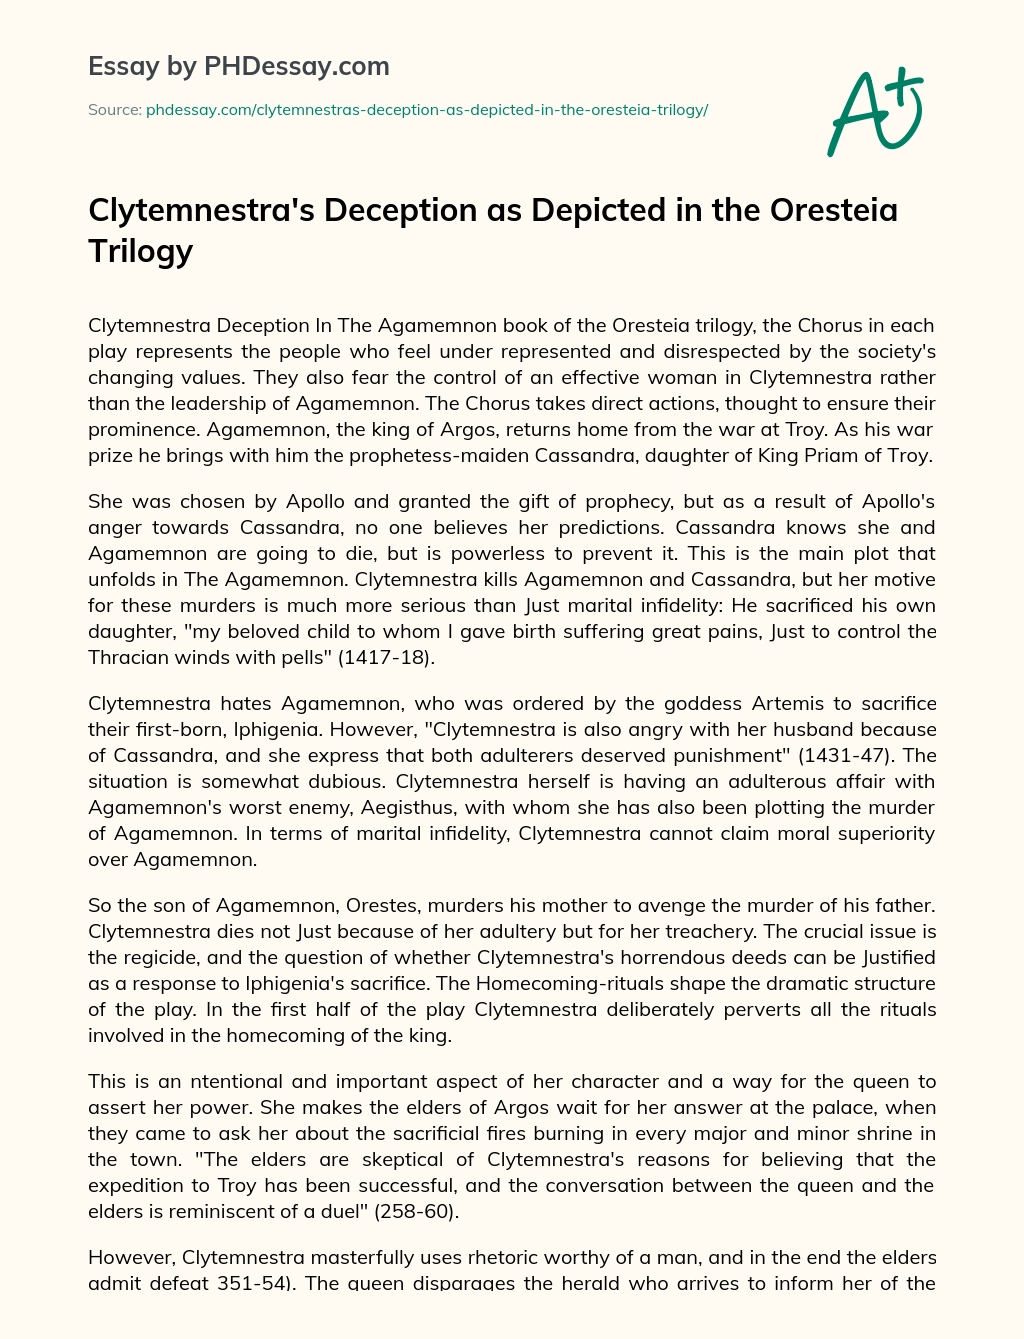 Clytemnestra’s Deception as Depicted in the Oresteia Trilogy essay